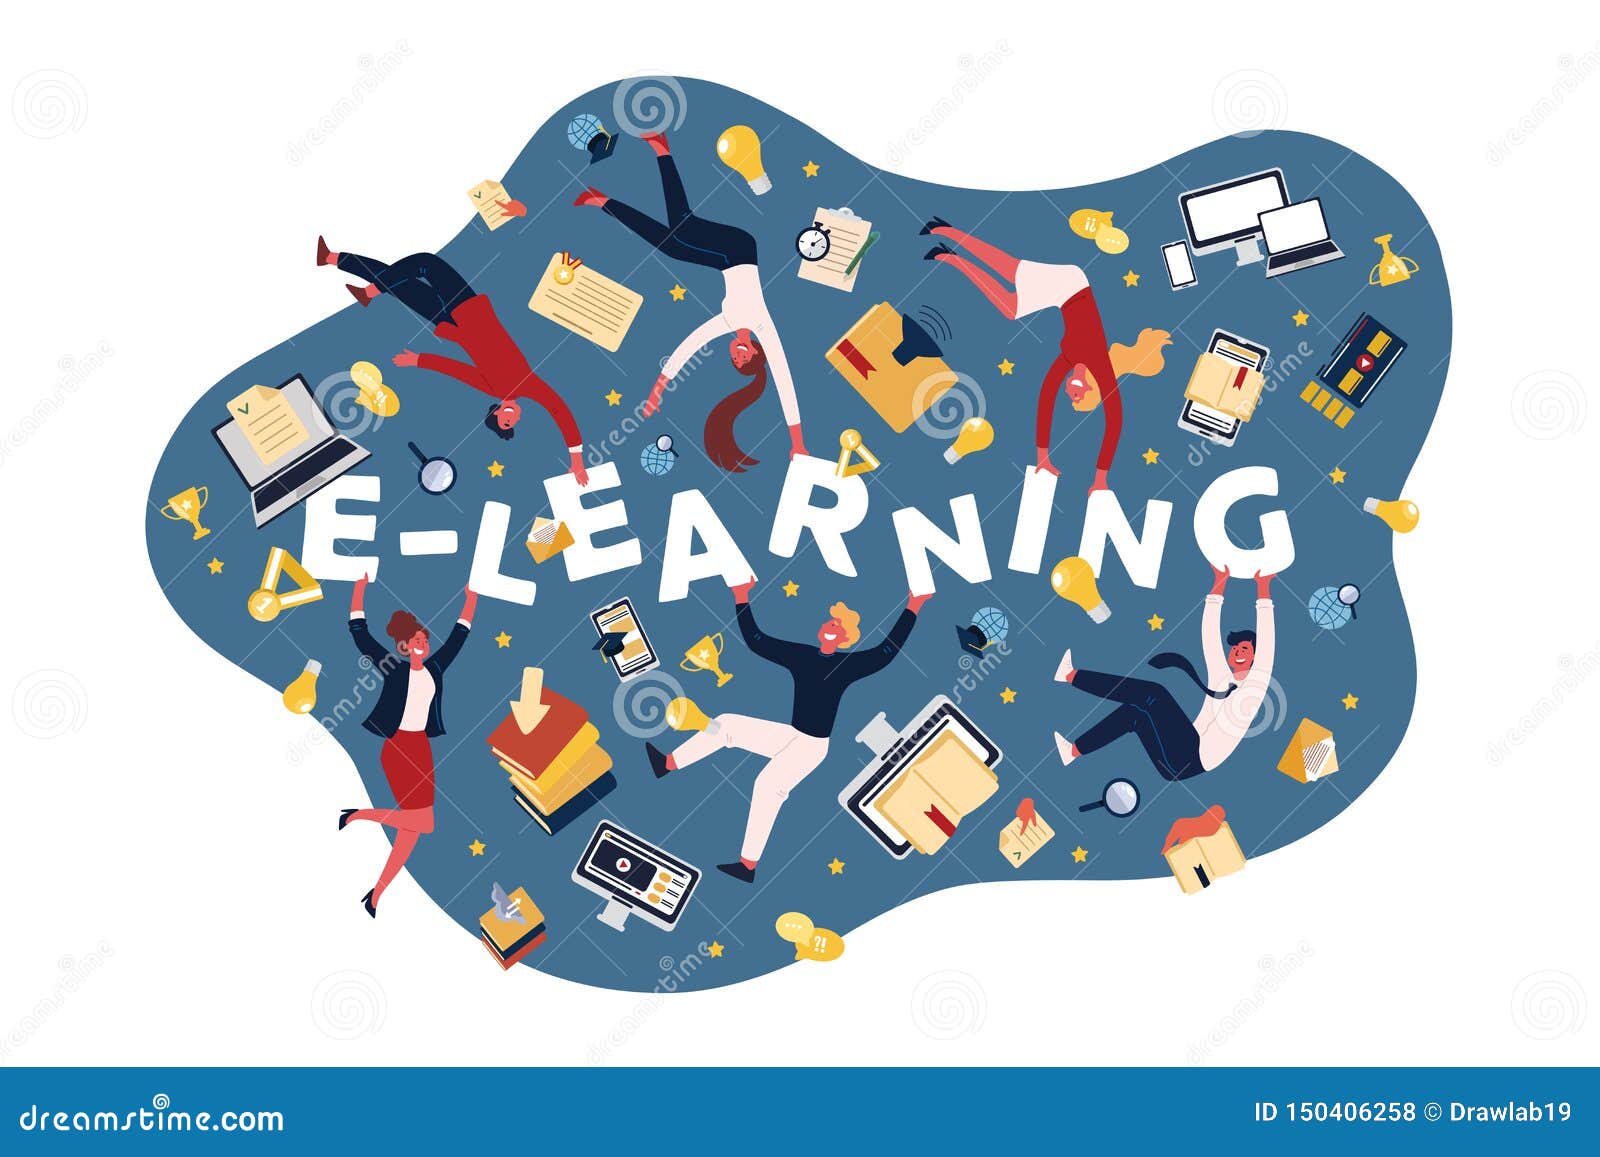 Learning Opportunities Stock Illustrations 1290 Learning